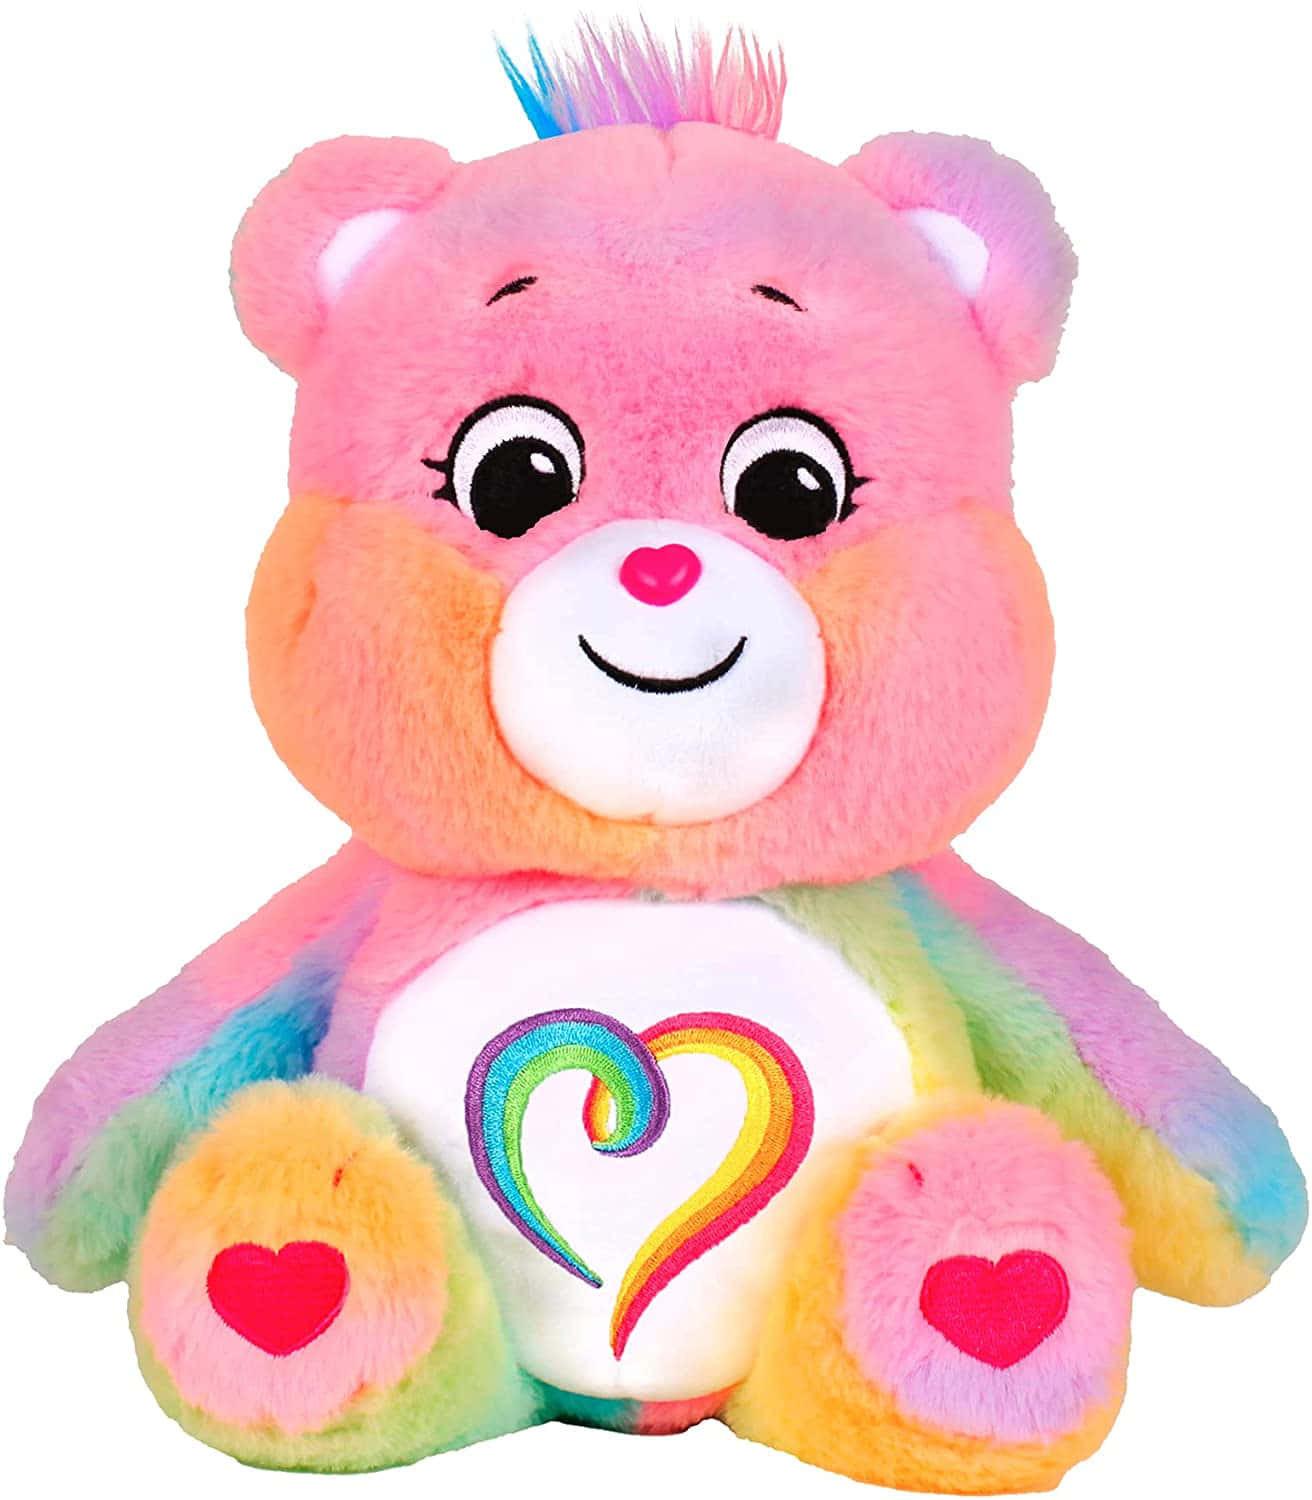 Feeling all the love with Care Bears